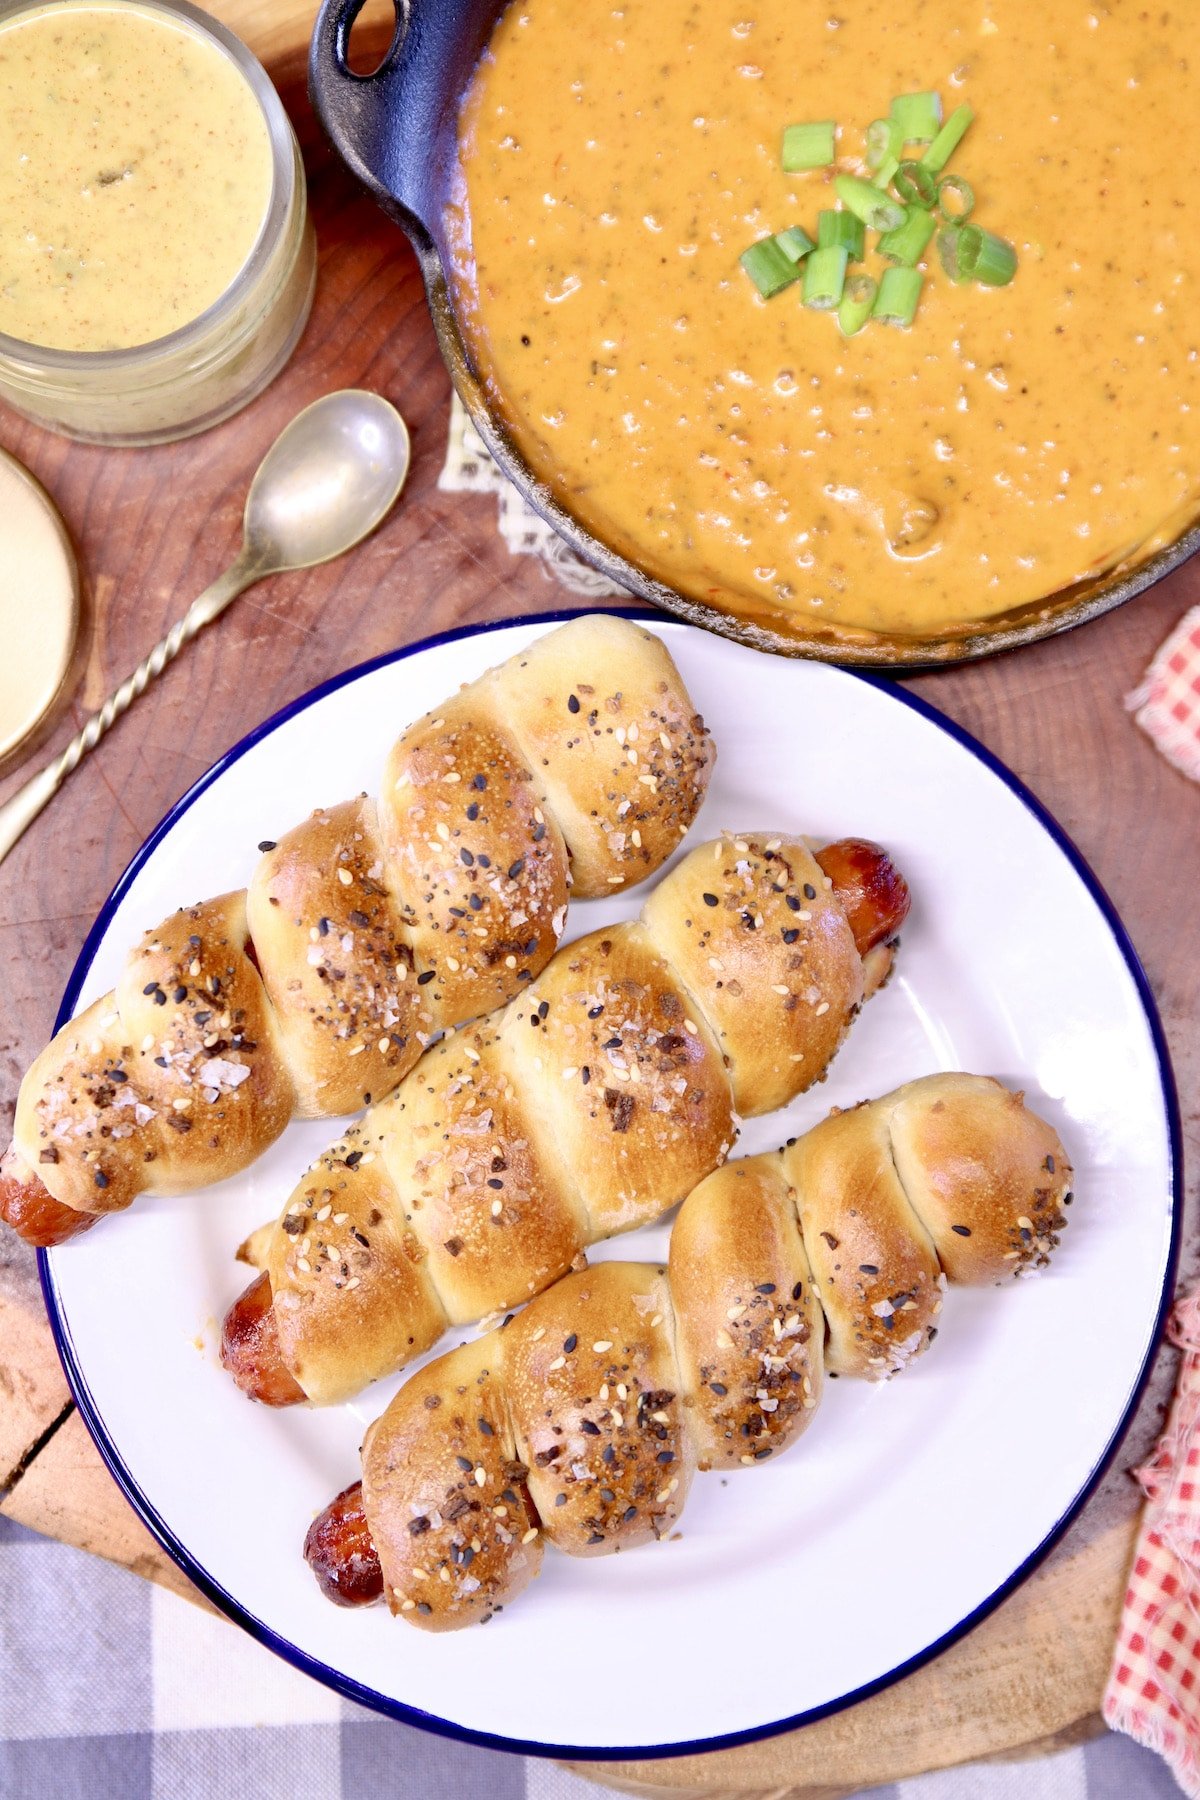 pretzel dogs with chili cheese dip and mustard